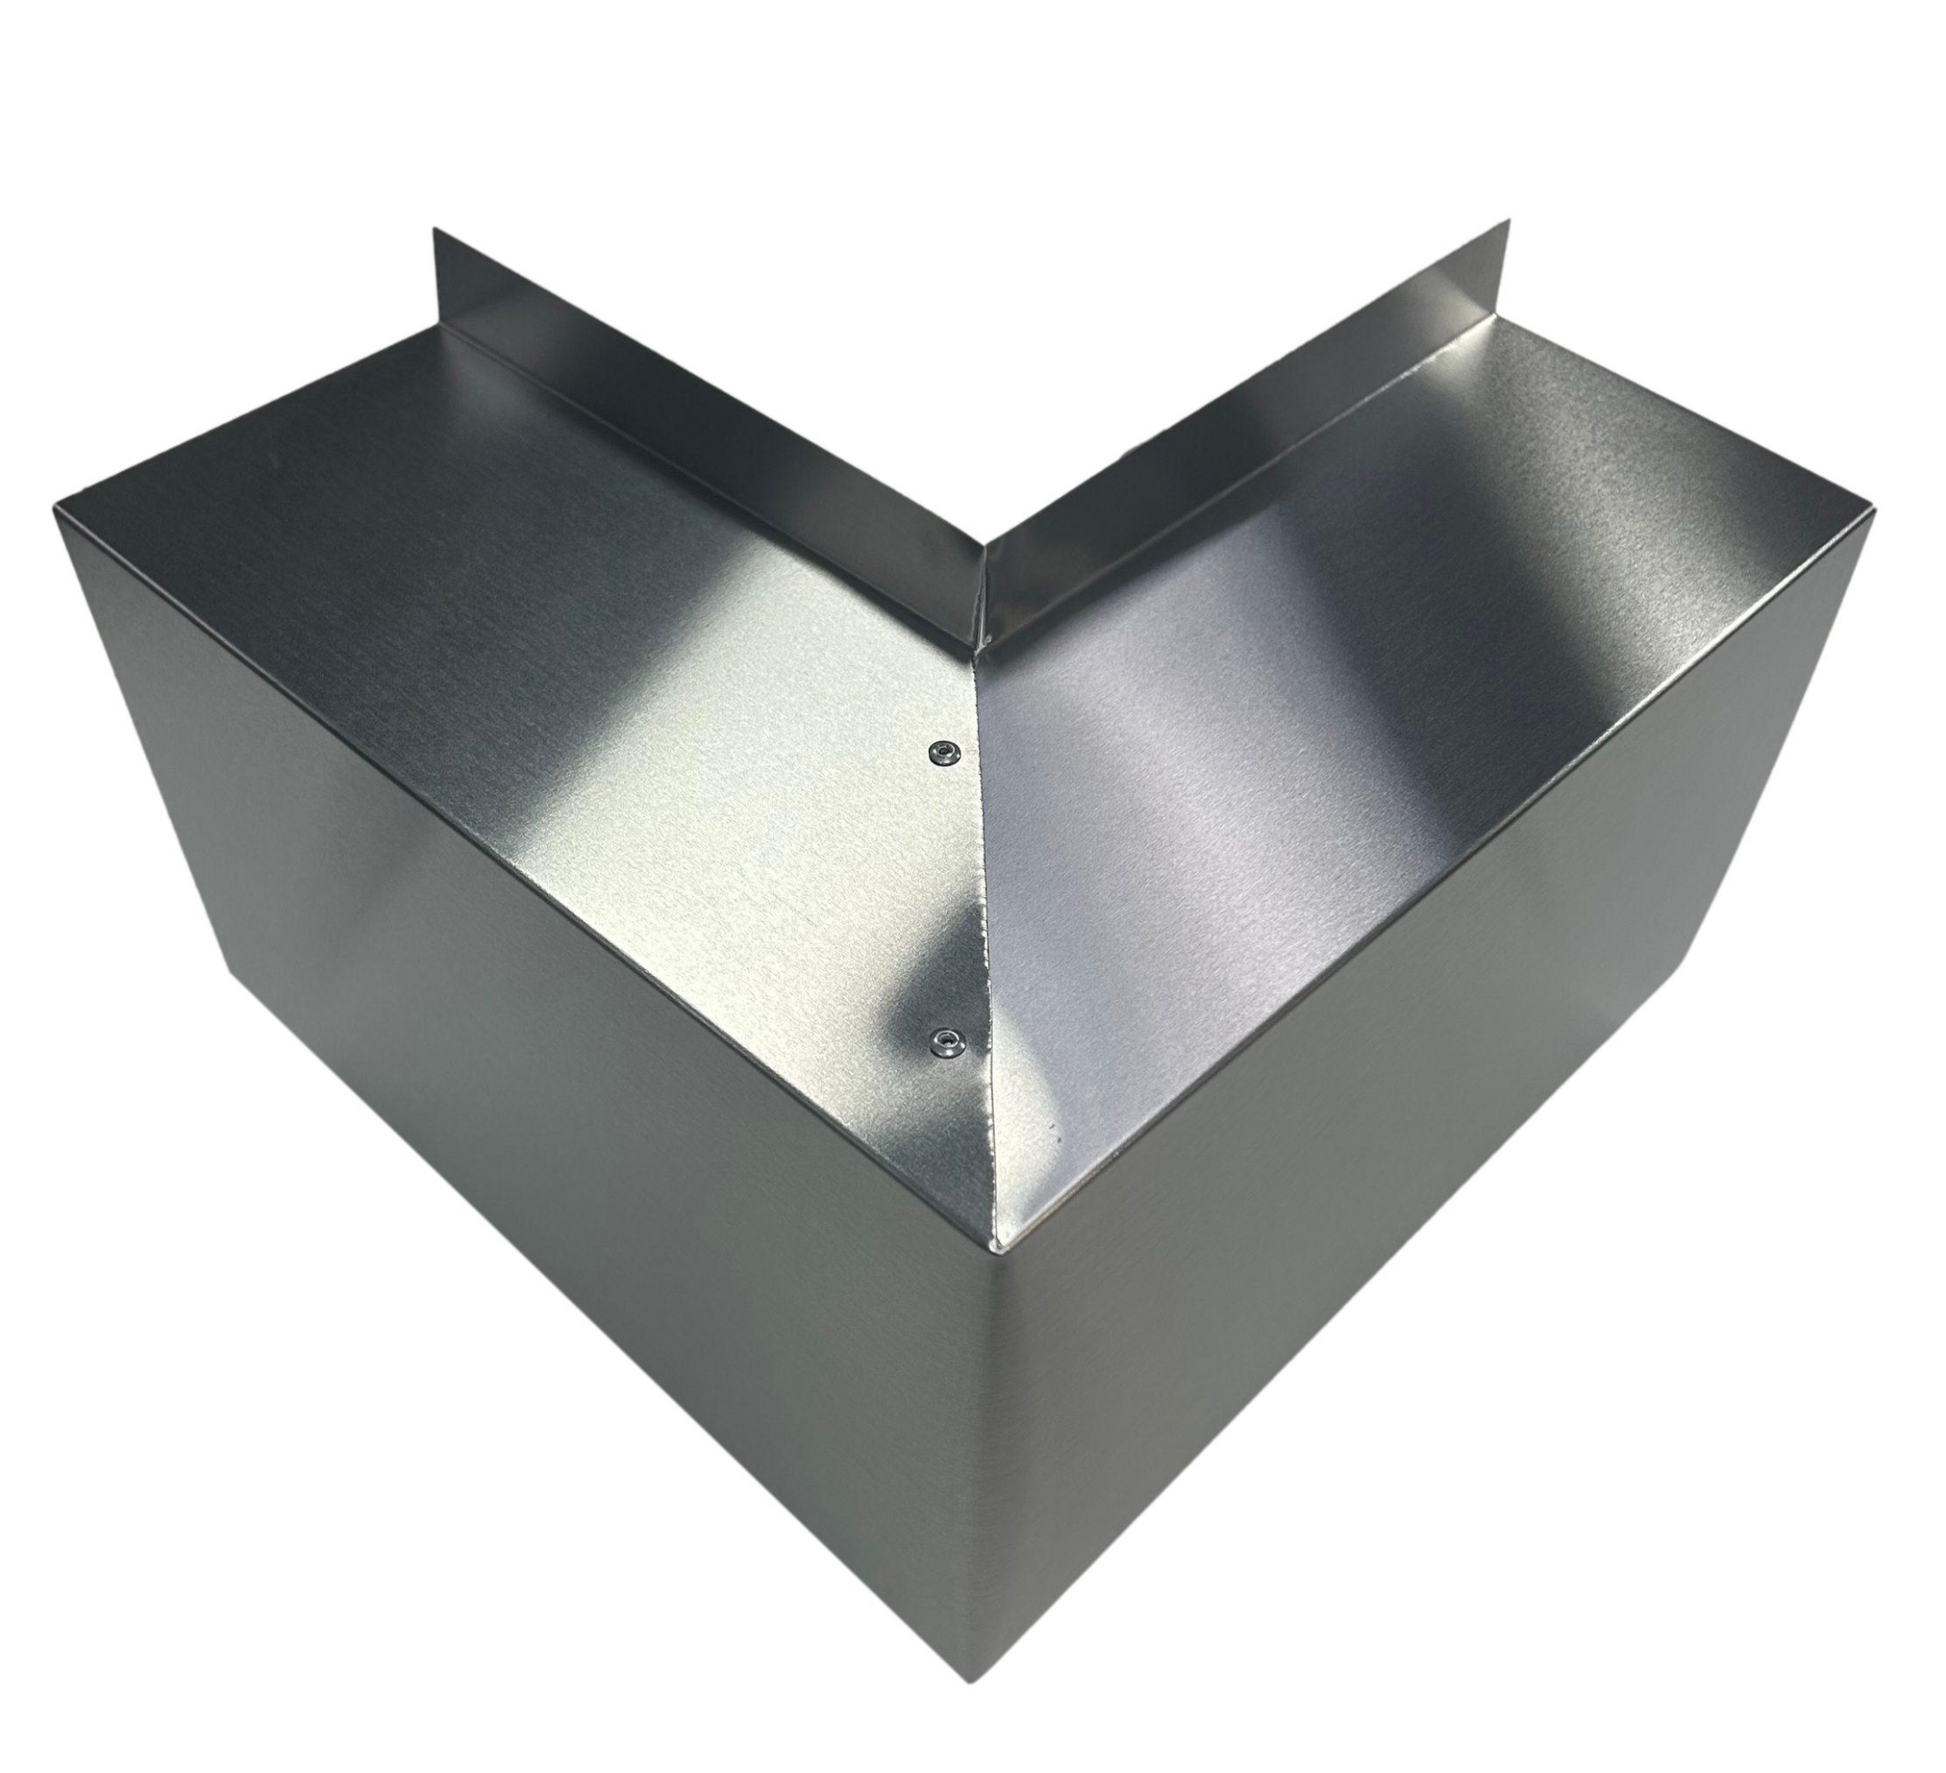 A Perma Cover Residential Series - Line Set Cover Outside Corner Elbows - Premium Quality, designed to protect wall corners from damage. The V-shaped guard features sharp angles and premium quality elbows, with two rivets securing a strip of metal along the top edge. Its slightly reflective surface ensures both durability and style.
